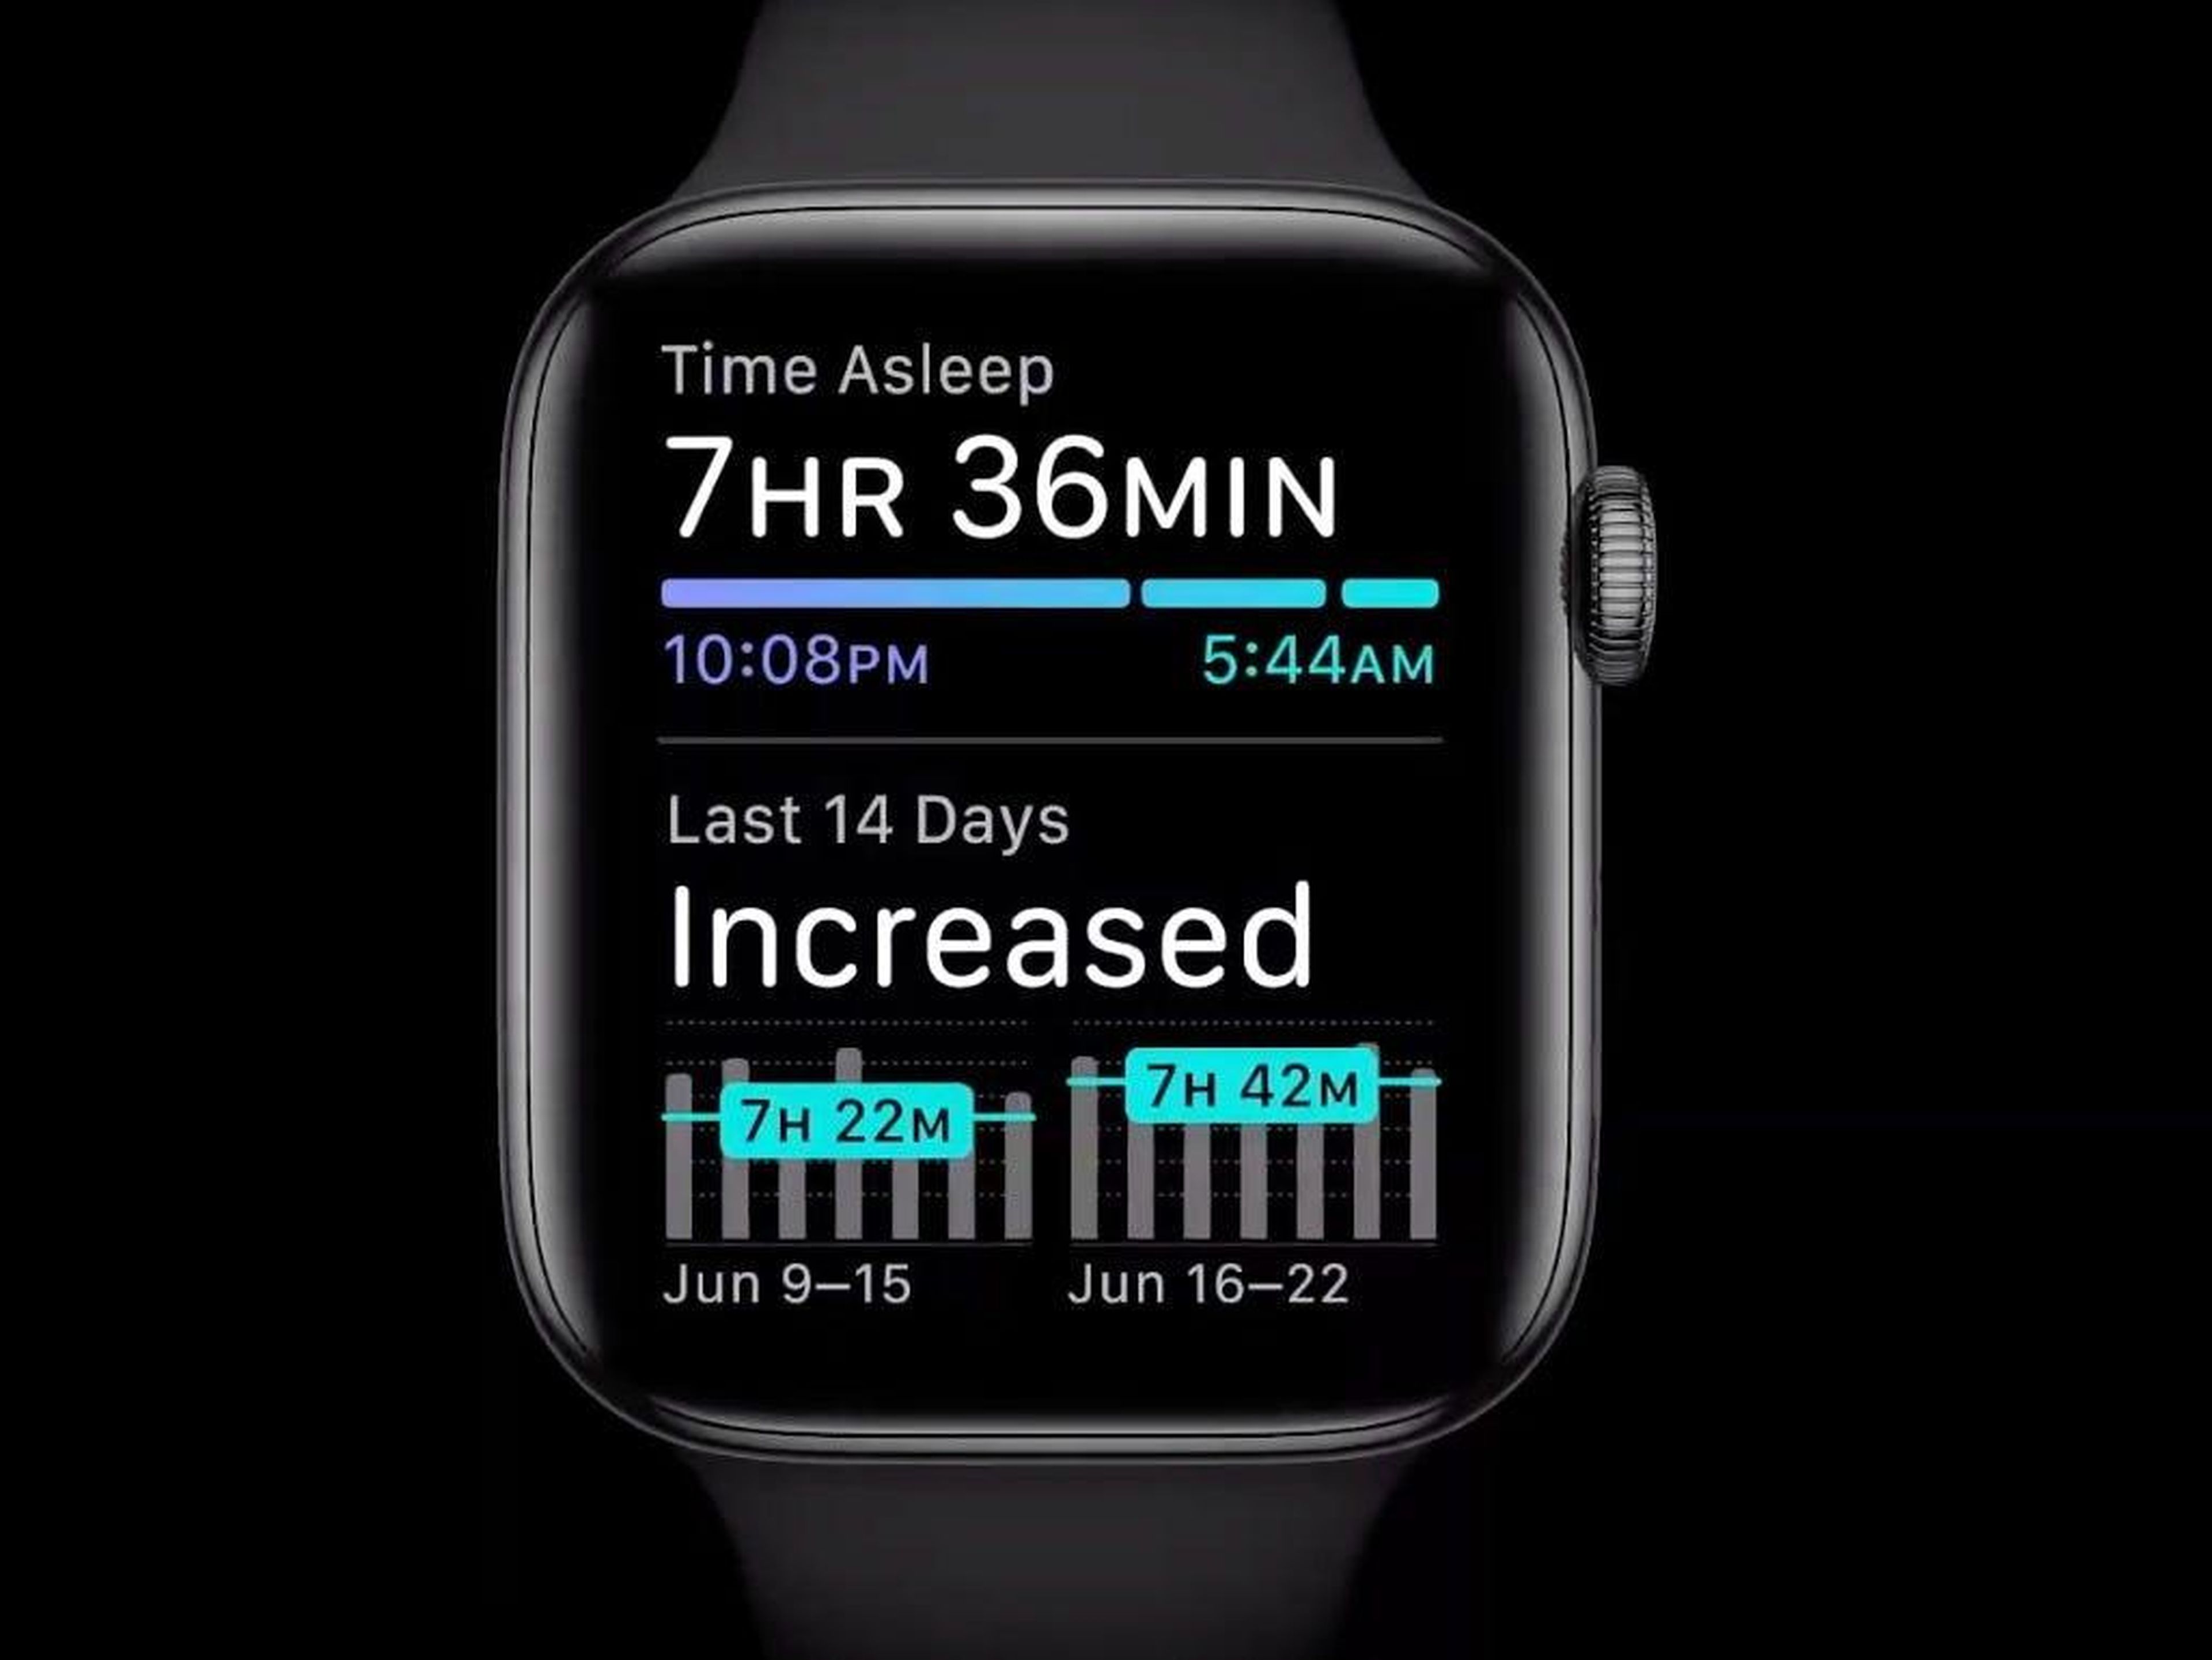 The Apple Watch is finally adding sleep tracking — the big feature it's been missing that Fitbit has offered for years